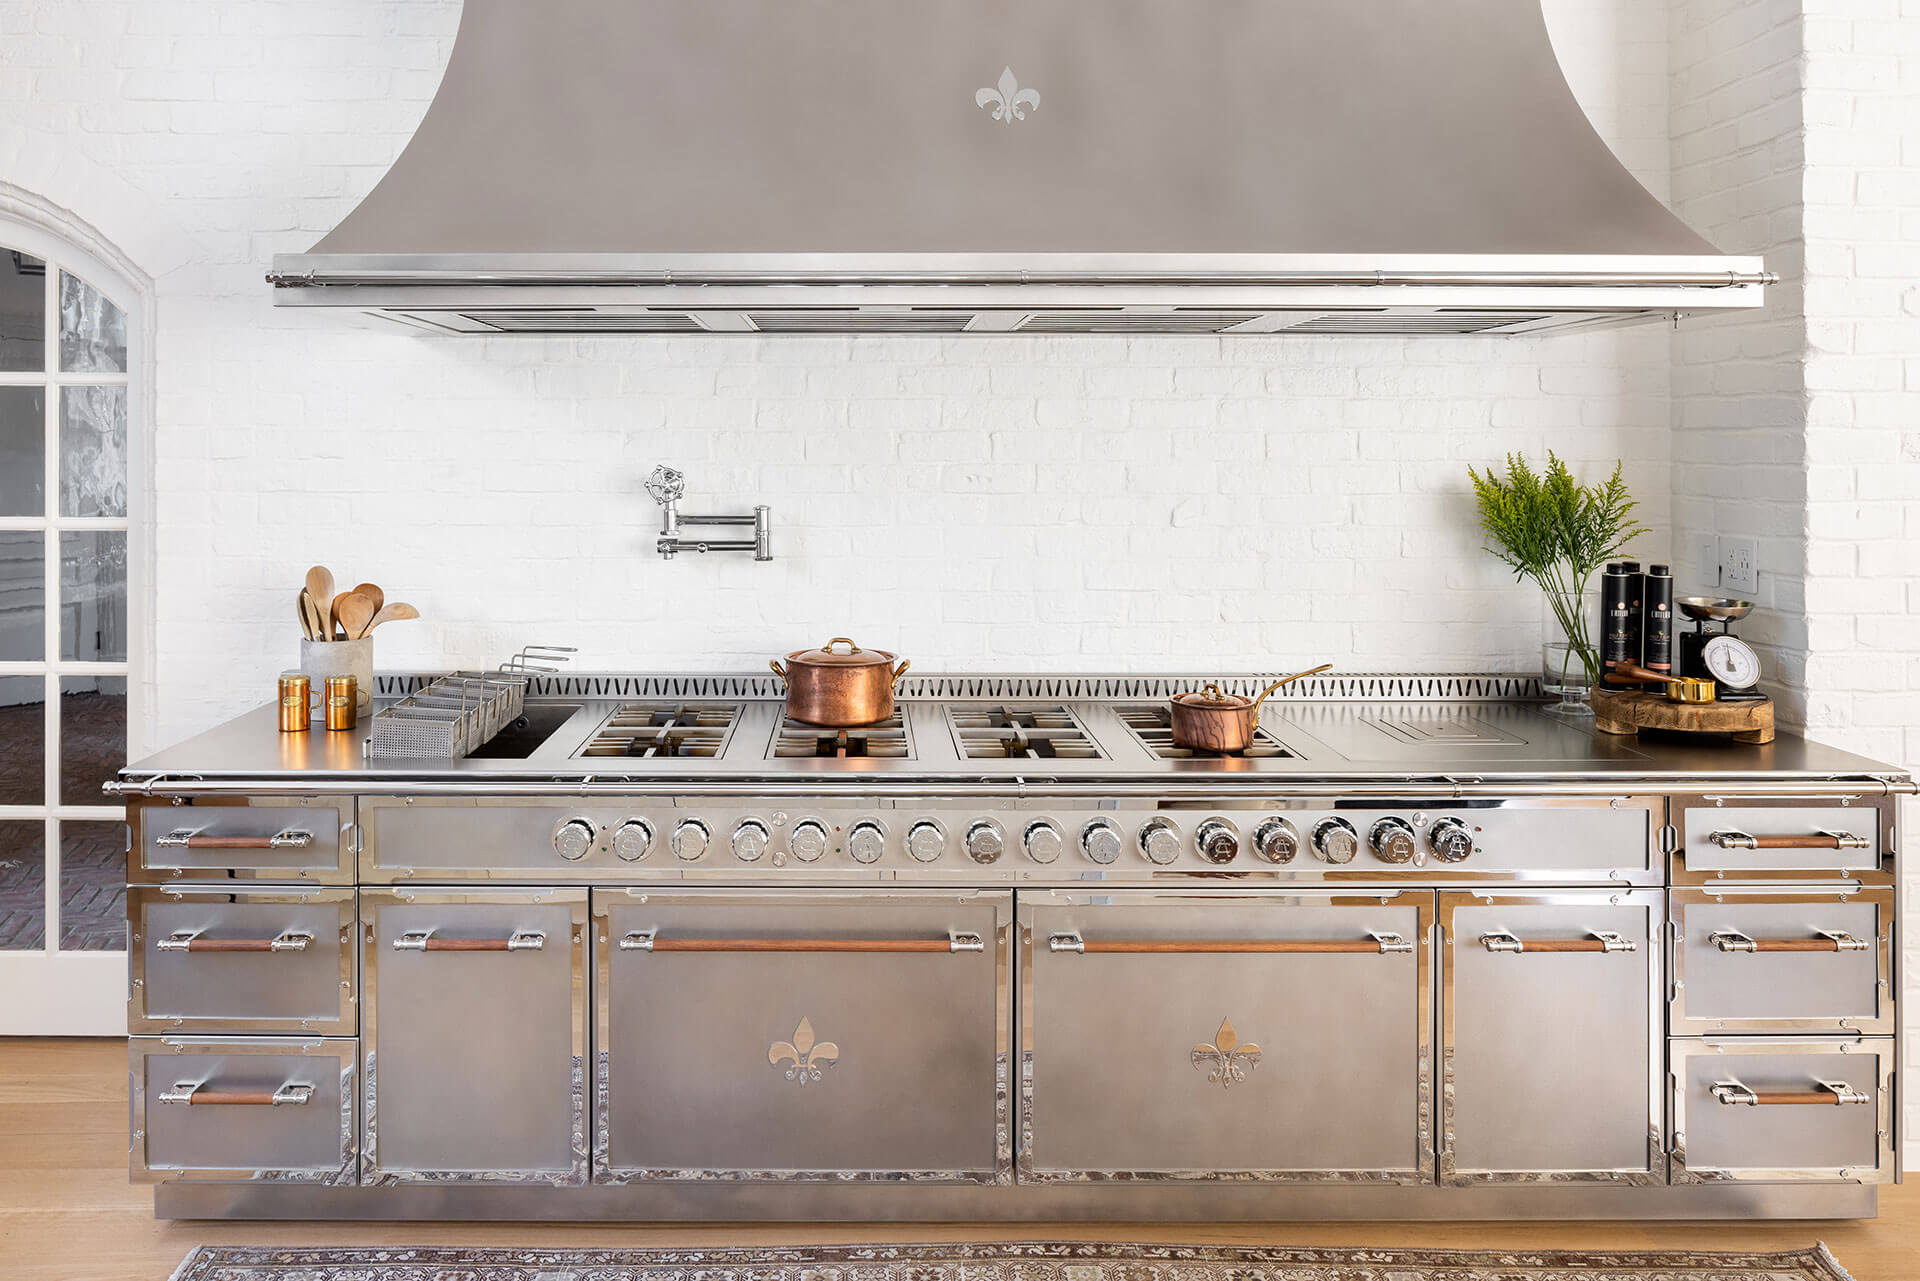 Silver Custom French Kitchen Range With Hood and Copperware on a stove